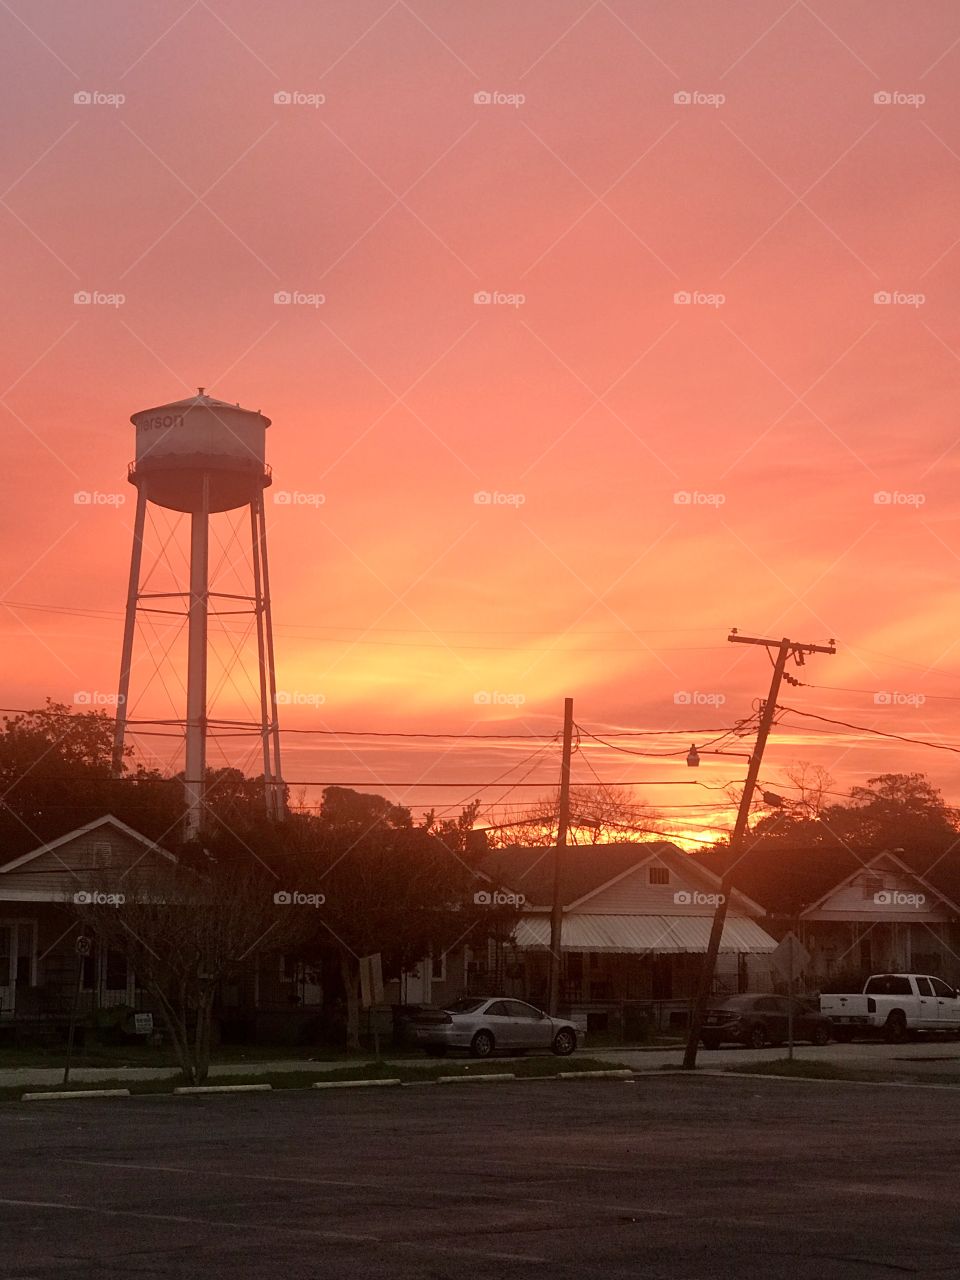 Sunrise in the South 